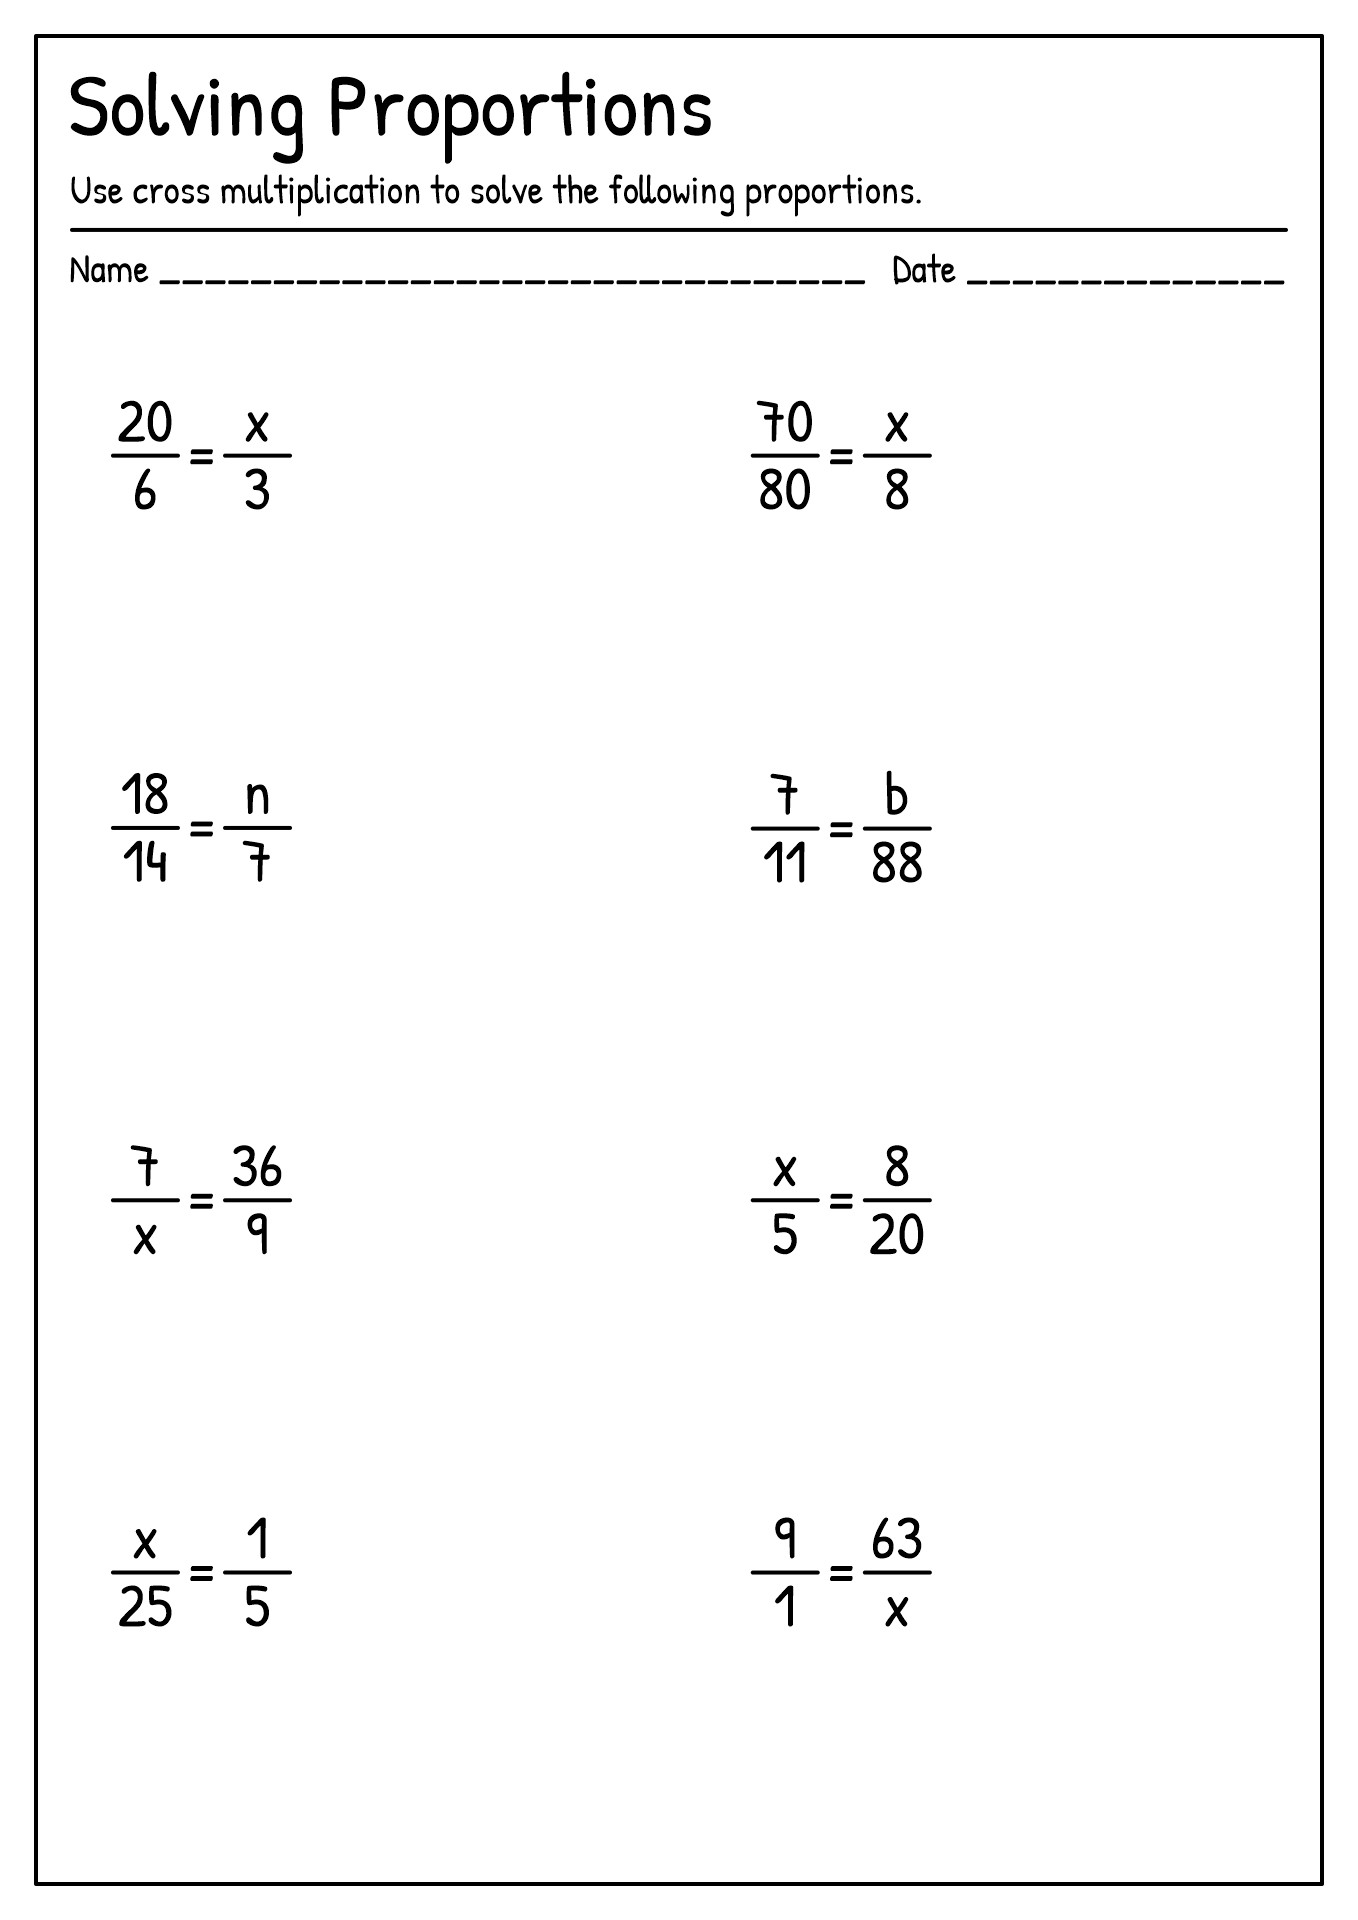 13-best-images-of-7th-grade-math-worksheets-proportions-proportions